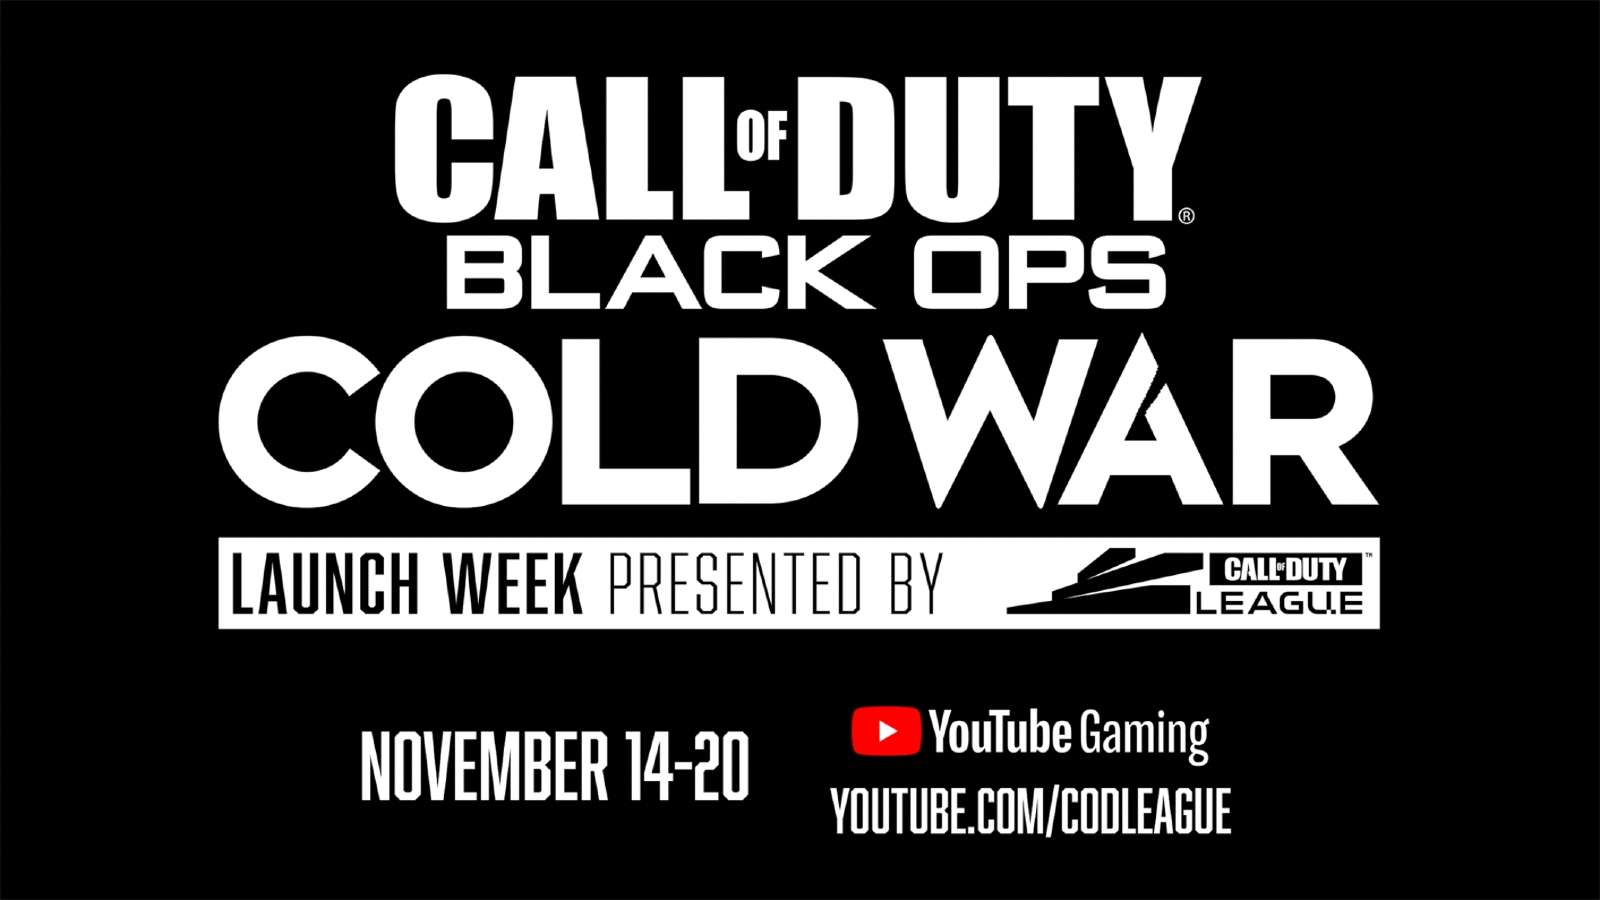 Call of Duty League Black Ops Cold War kickoff tournaments